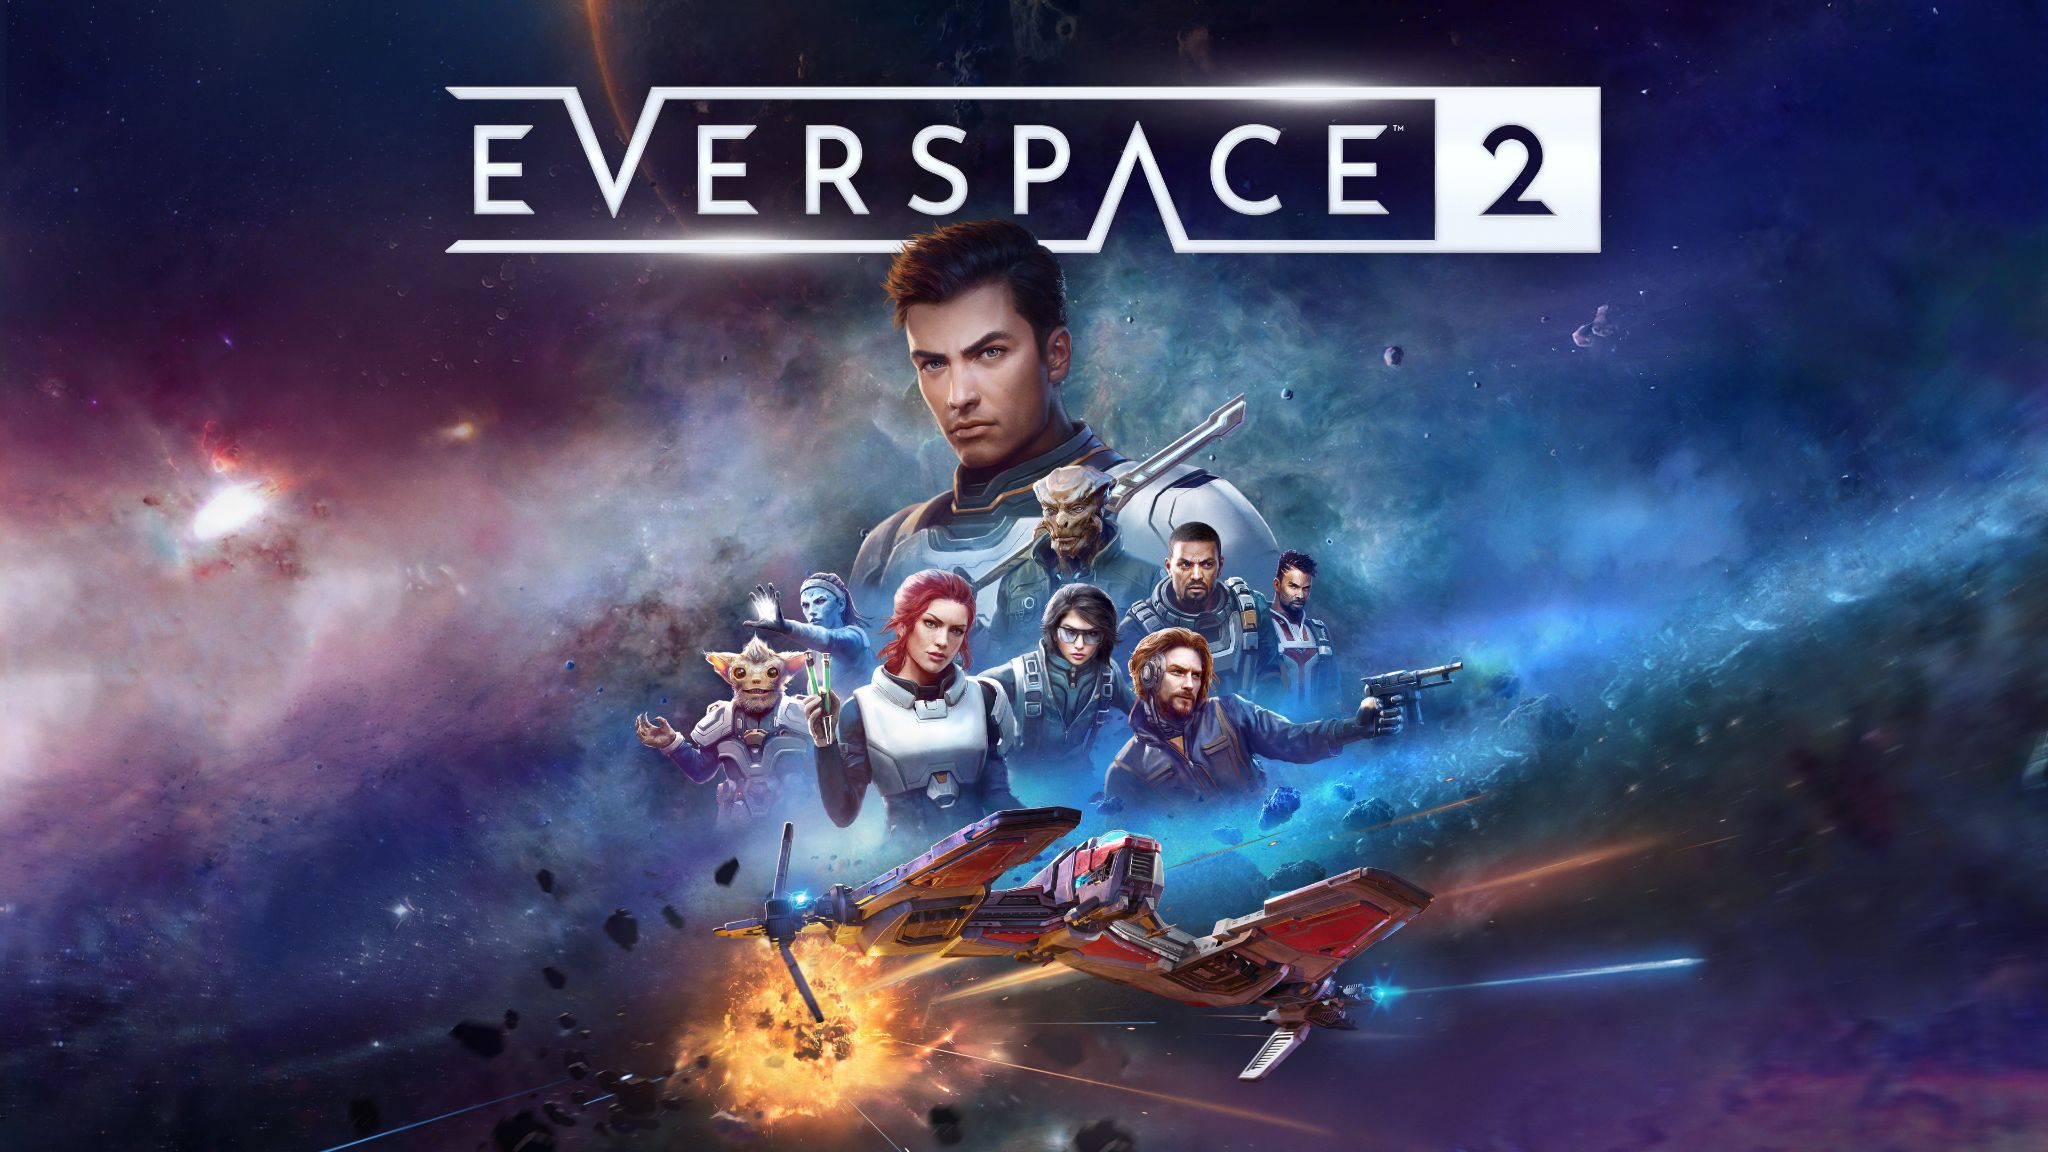 EVERSPACE 2 launches April 6 for PC, this PS5 and Xbox Series - Gematsu